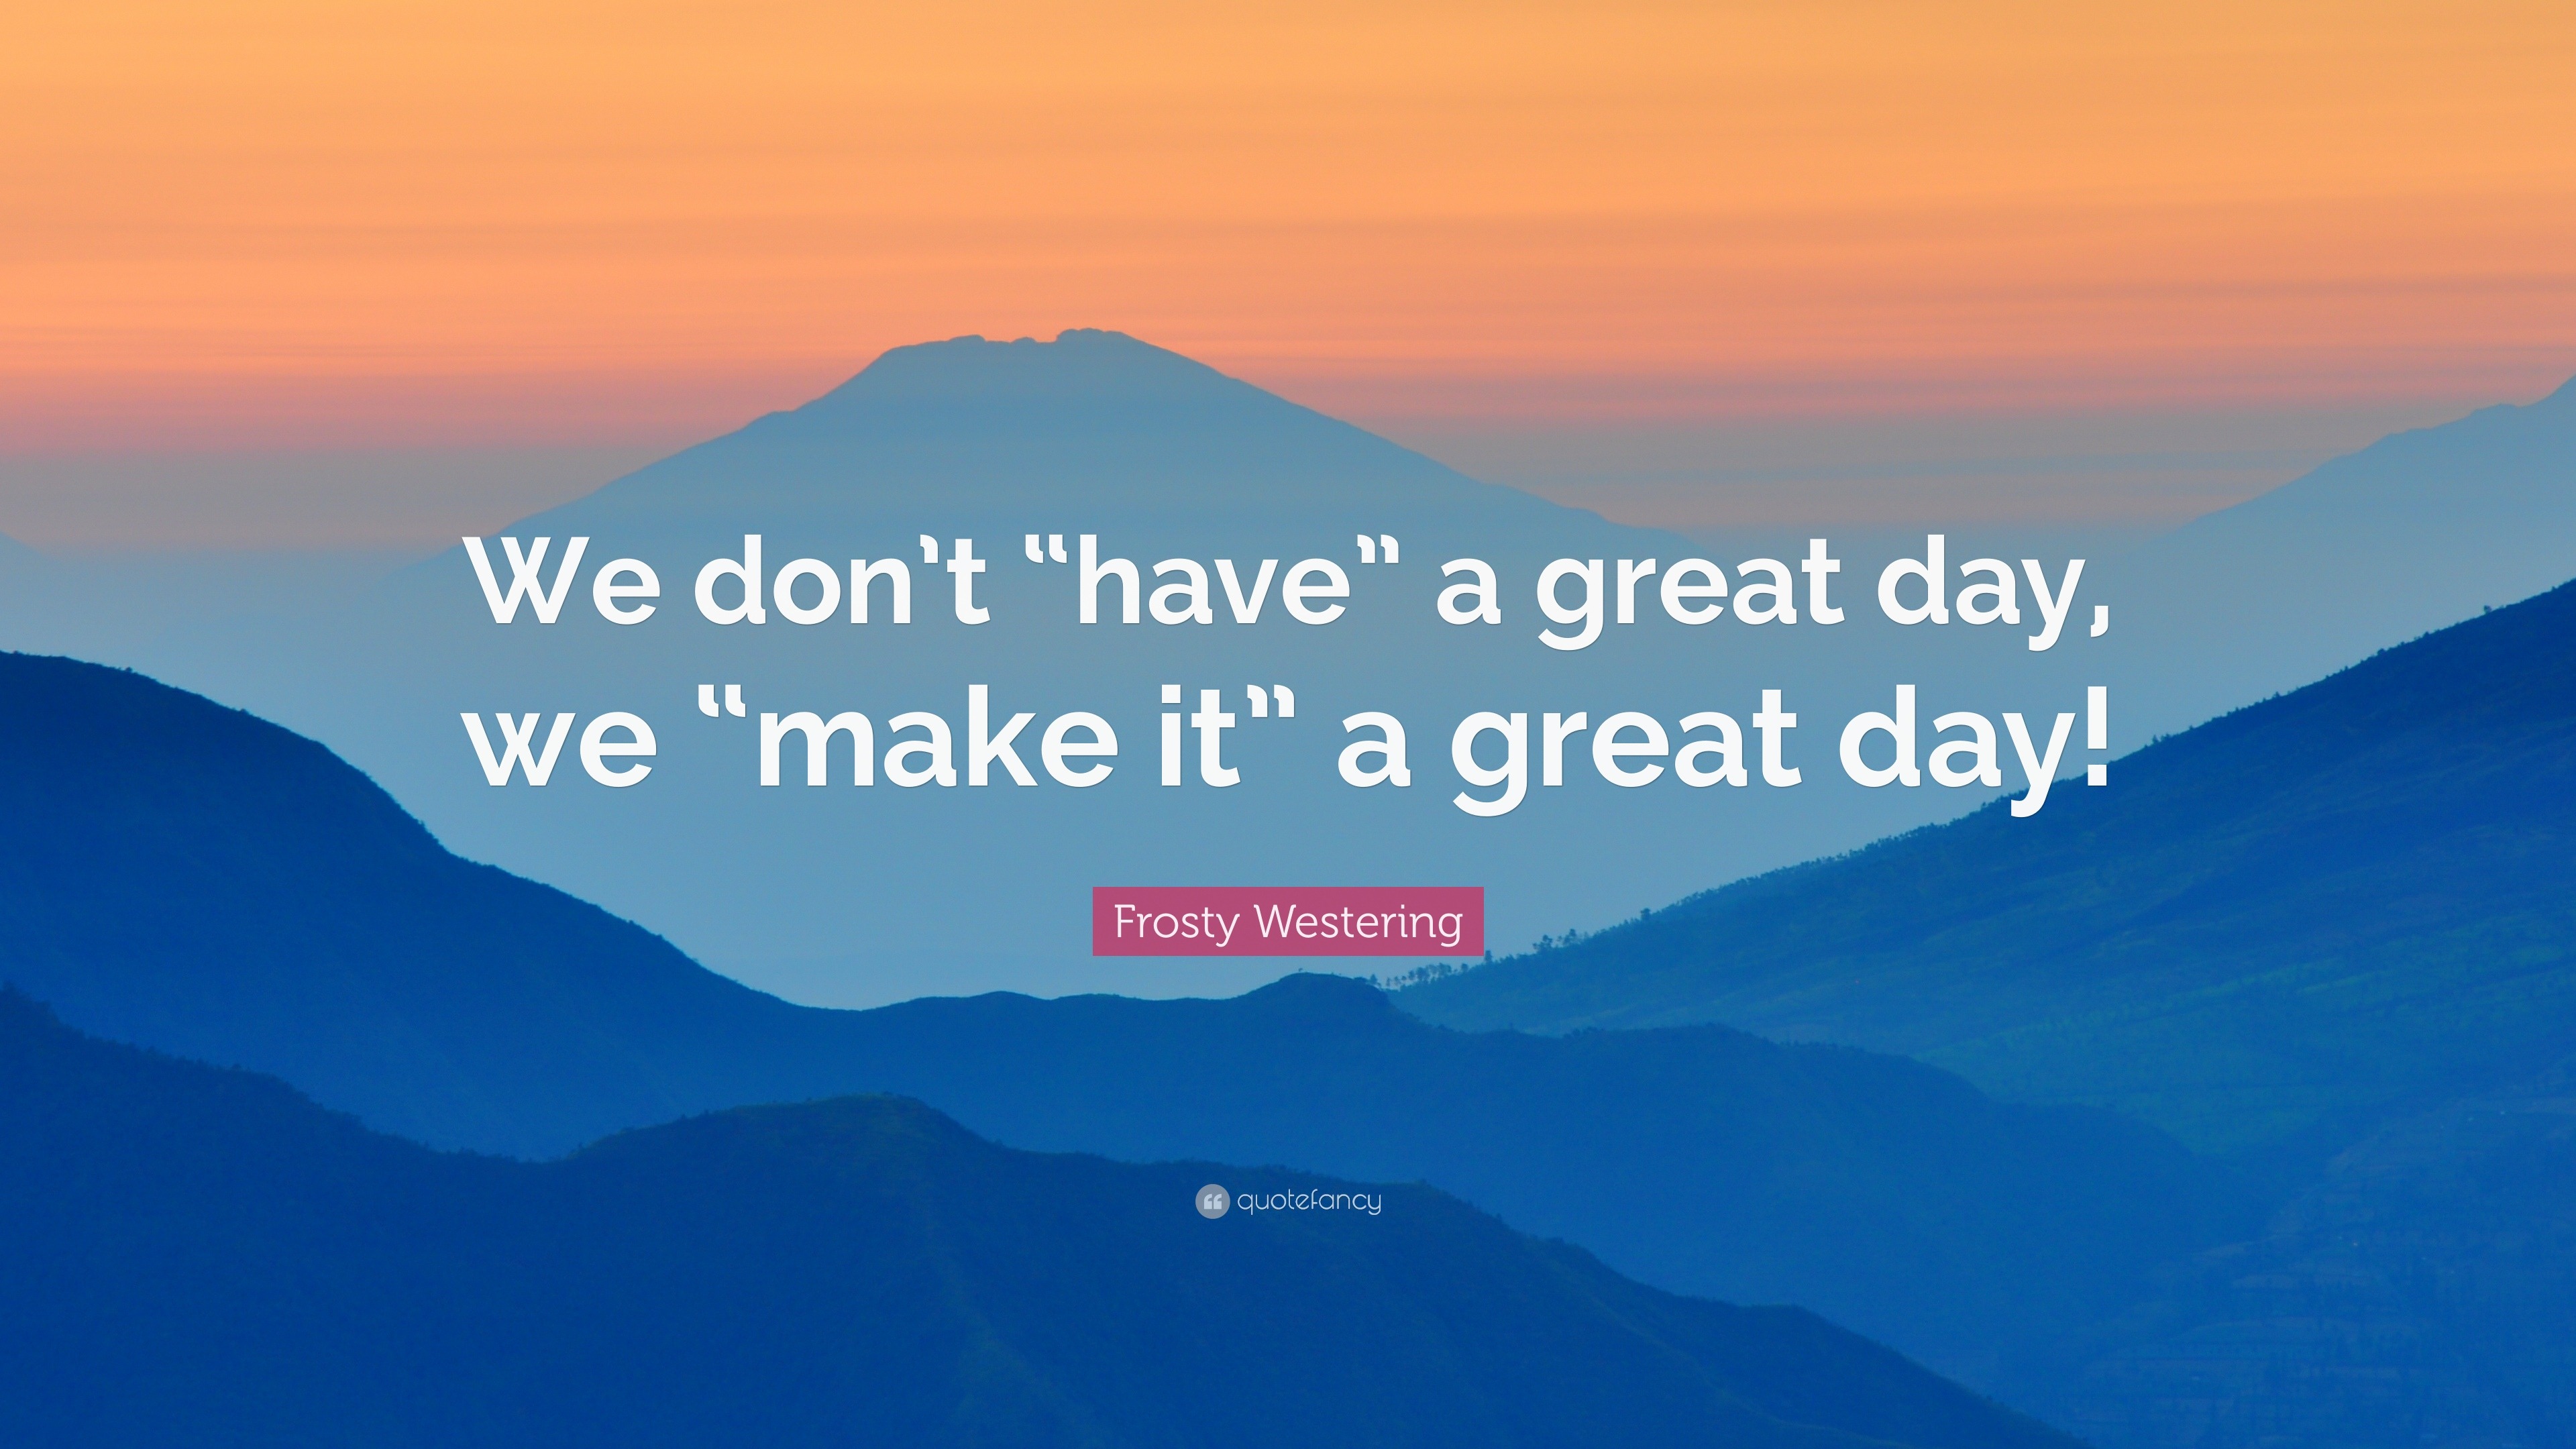 Frosty Westering Quote: “We don’t “have” a great day, we “make it” a ...